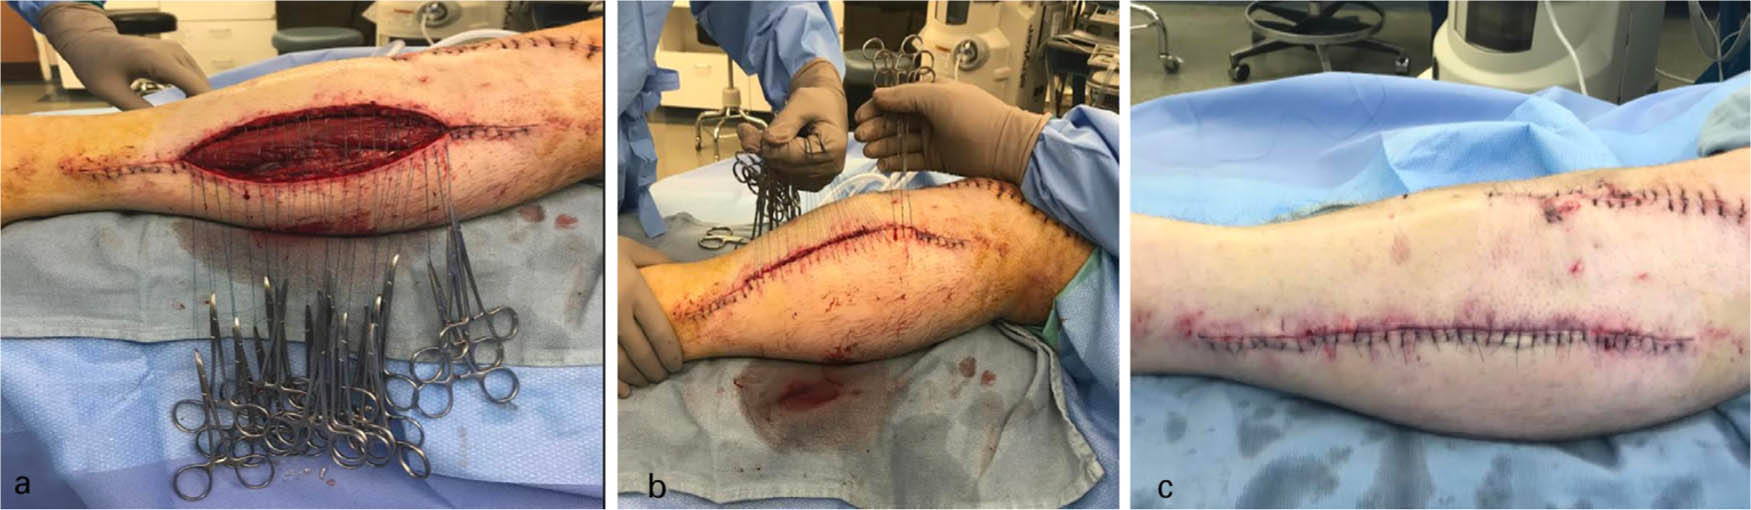 Fig. 2 
          Clinical photograph of a tension free fasciotomy using the described suture technique: (a) Each suture is thrown and snapped; (b) Even tension is then pulled across each suture to approximate the skin edges prior to tying resulting in (c) a well approximated, tension-free closure.
        